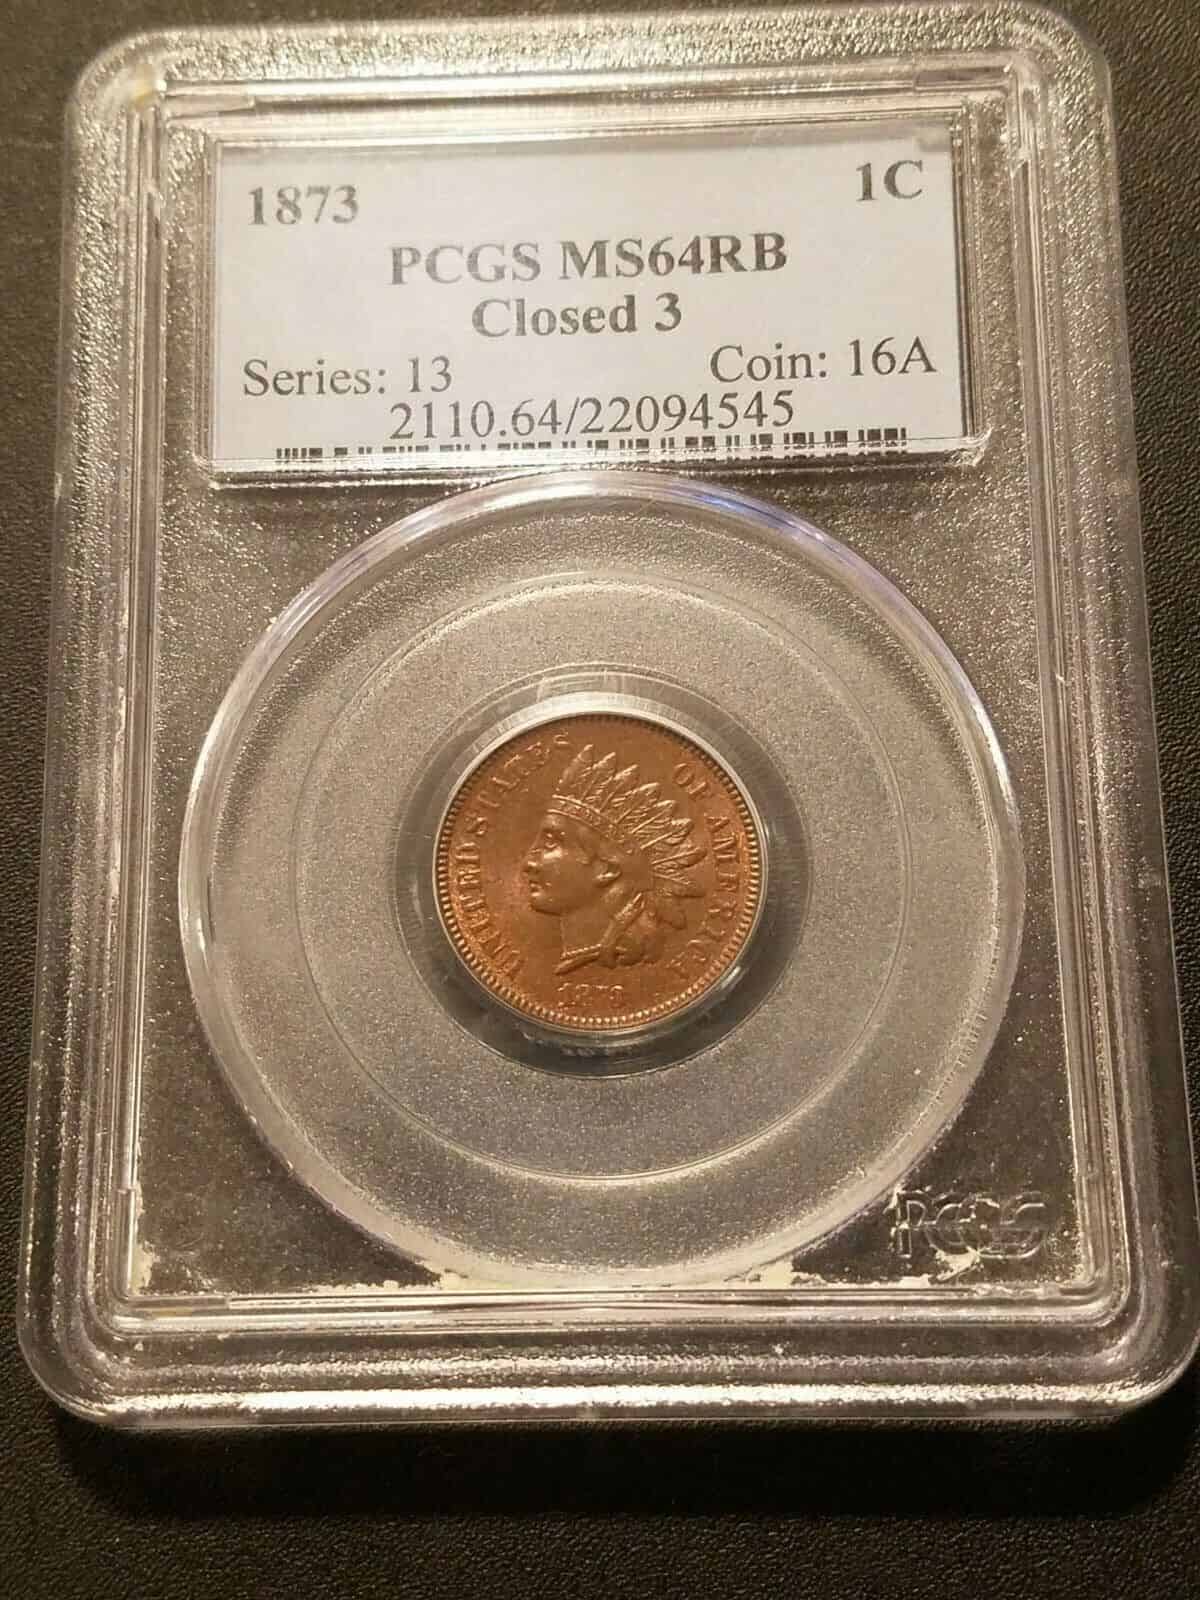 1873 Closed 3 Indian Head Cent  PCGS MS64RB RedBrown  Only 68 Grade Higher